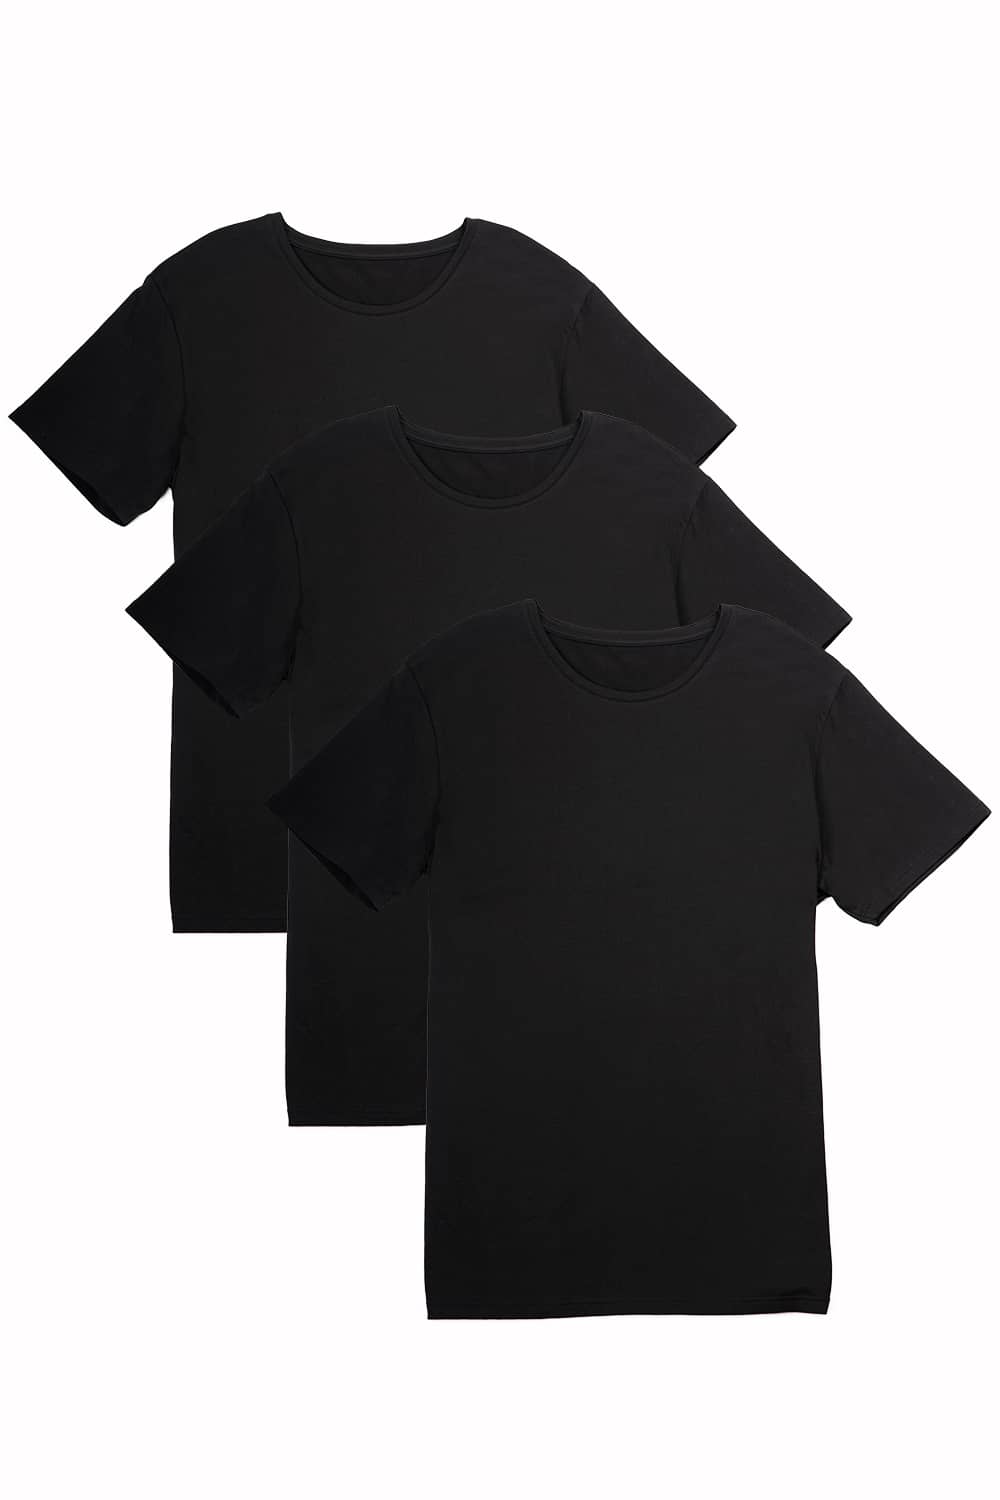 Men's Classic Fit Soft Stretch Crew Neck Undershirt Mens>Casual>Tops Fishers Finery Black Small 3 Pack